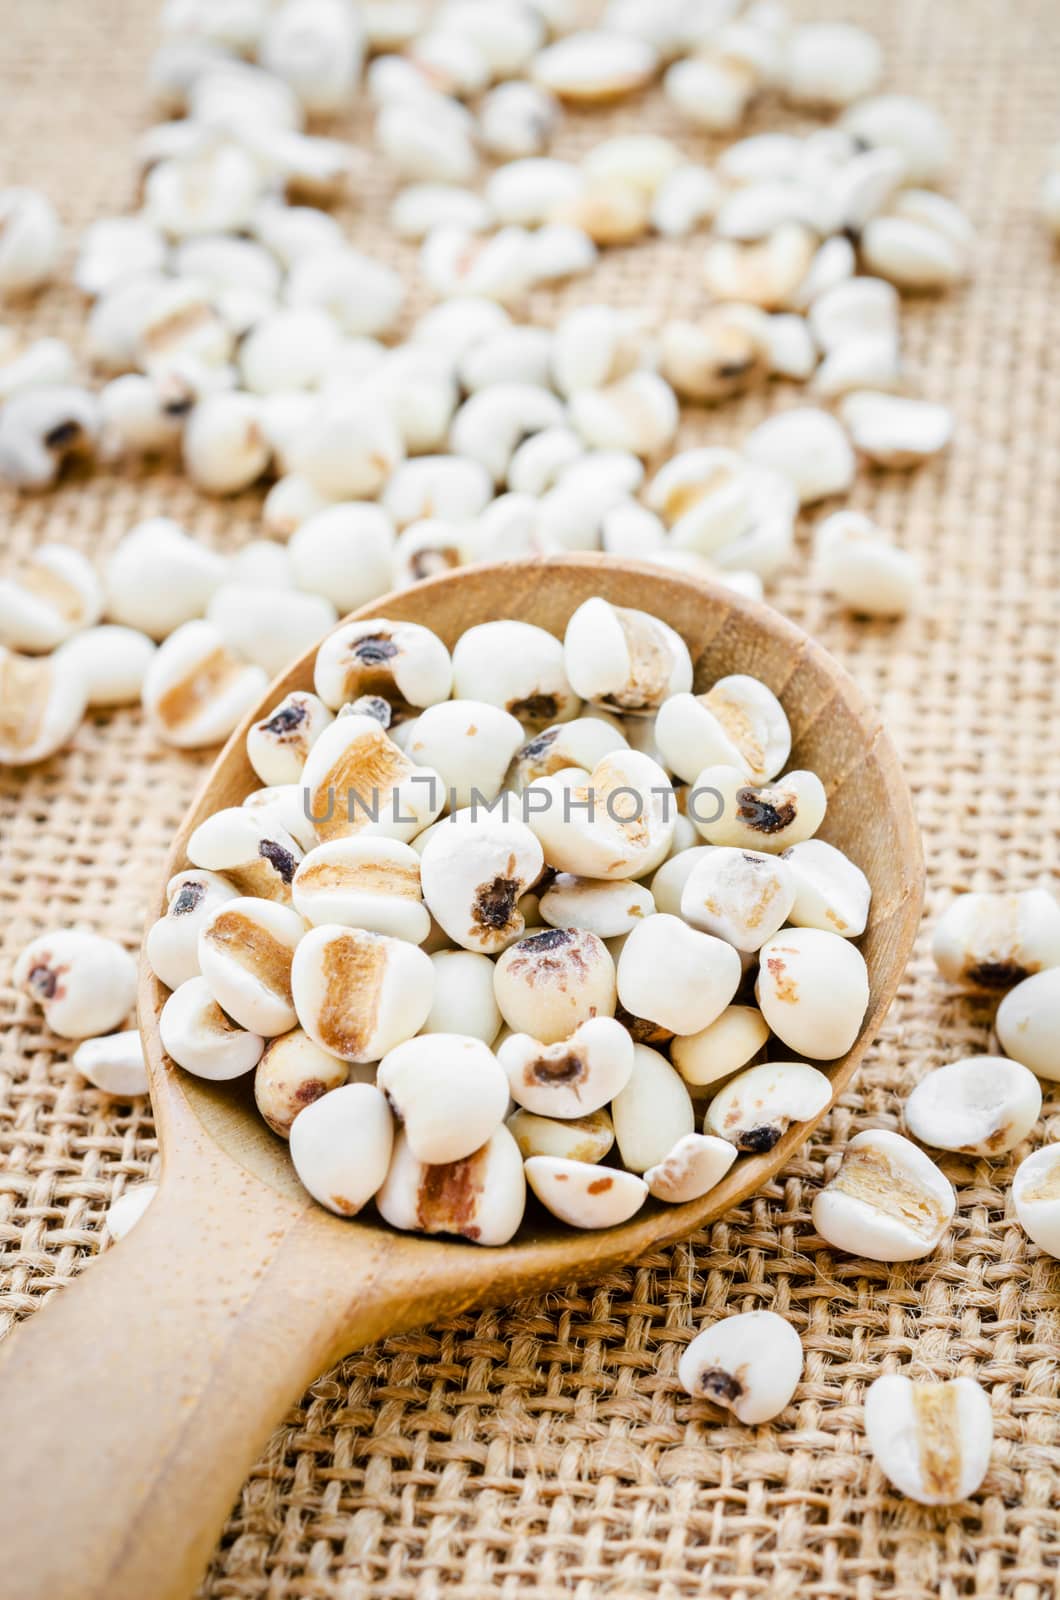 Job's tears with wooden spoon, Millet grains, Organic seeds on sack background.